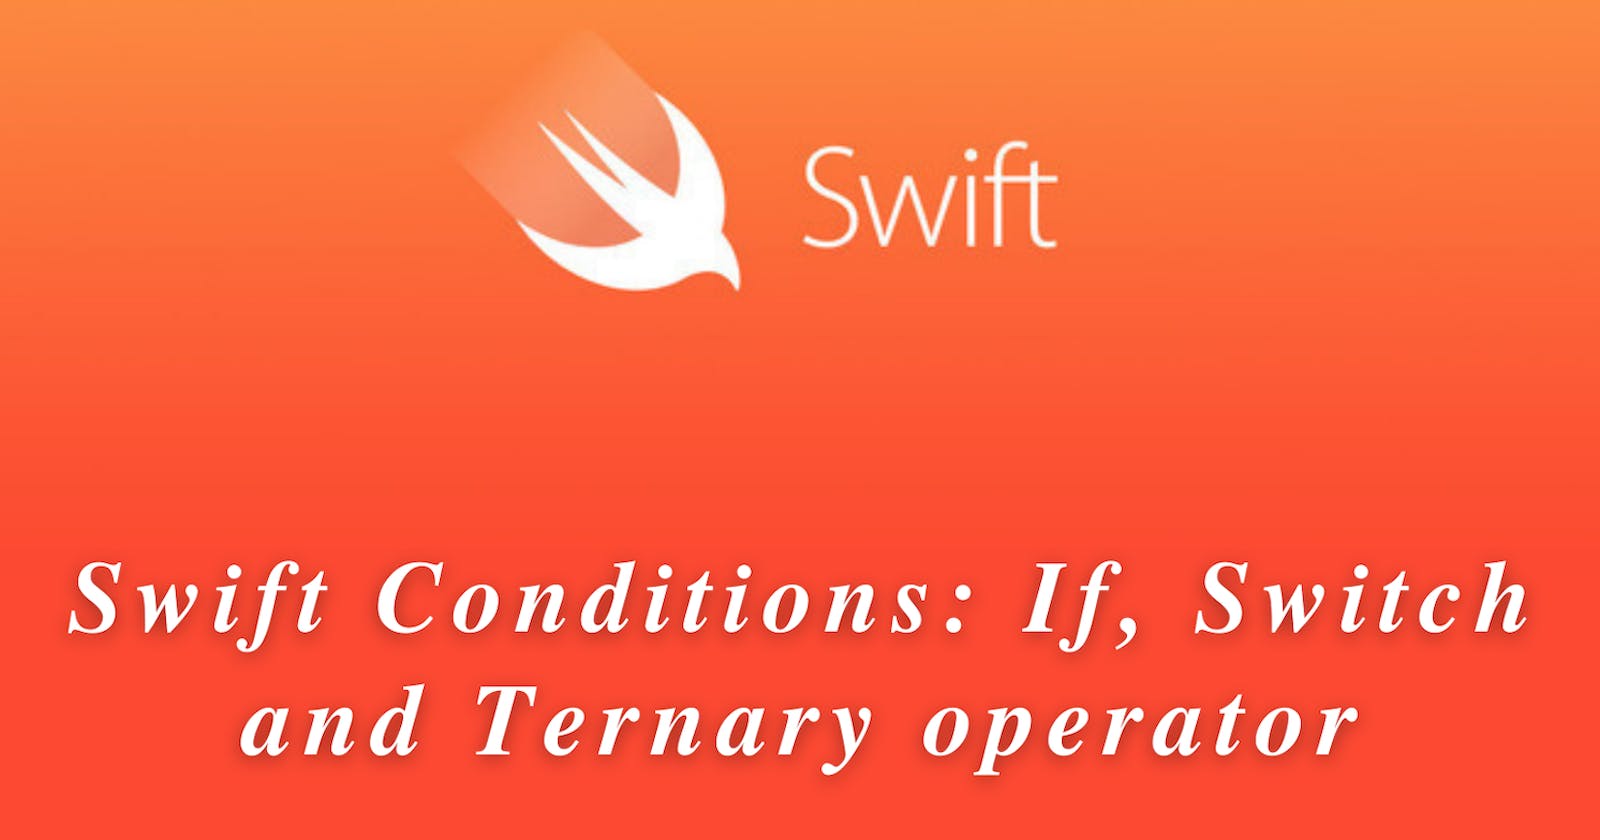 Swift Conditions: If, Switch and Ternary operator